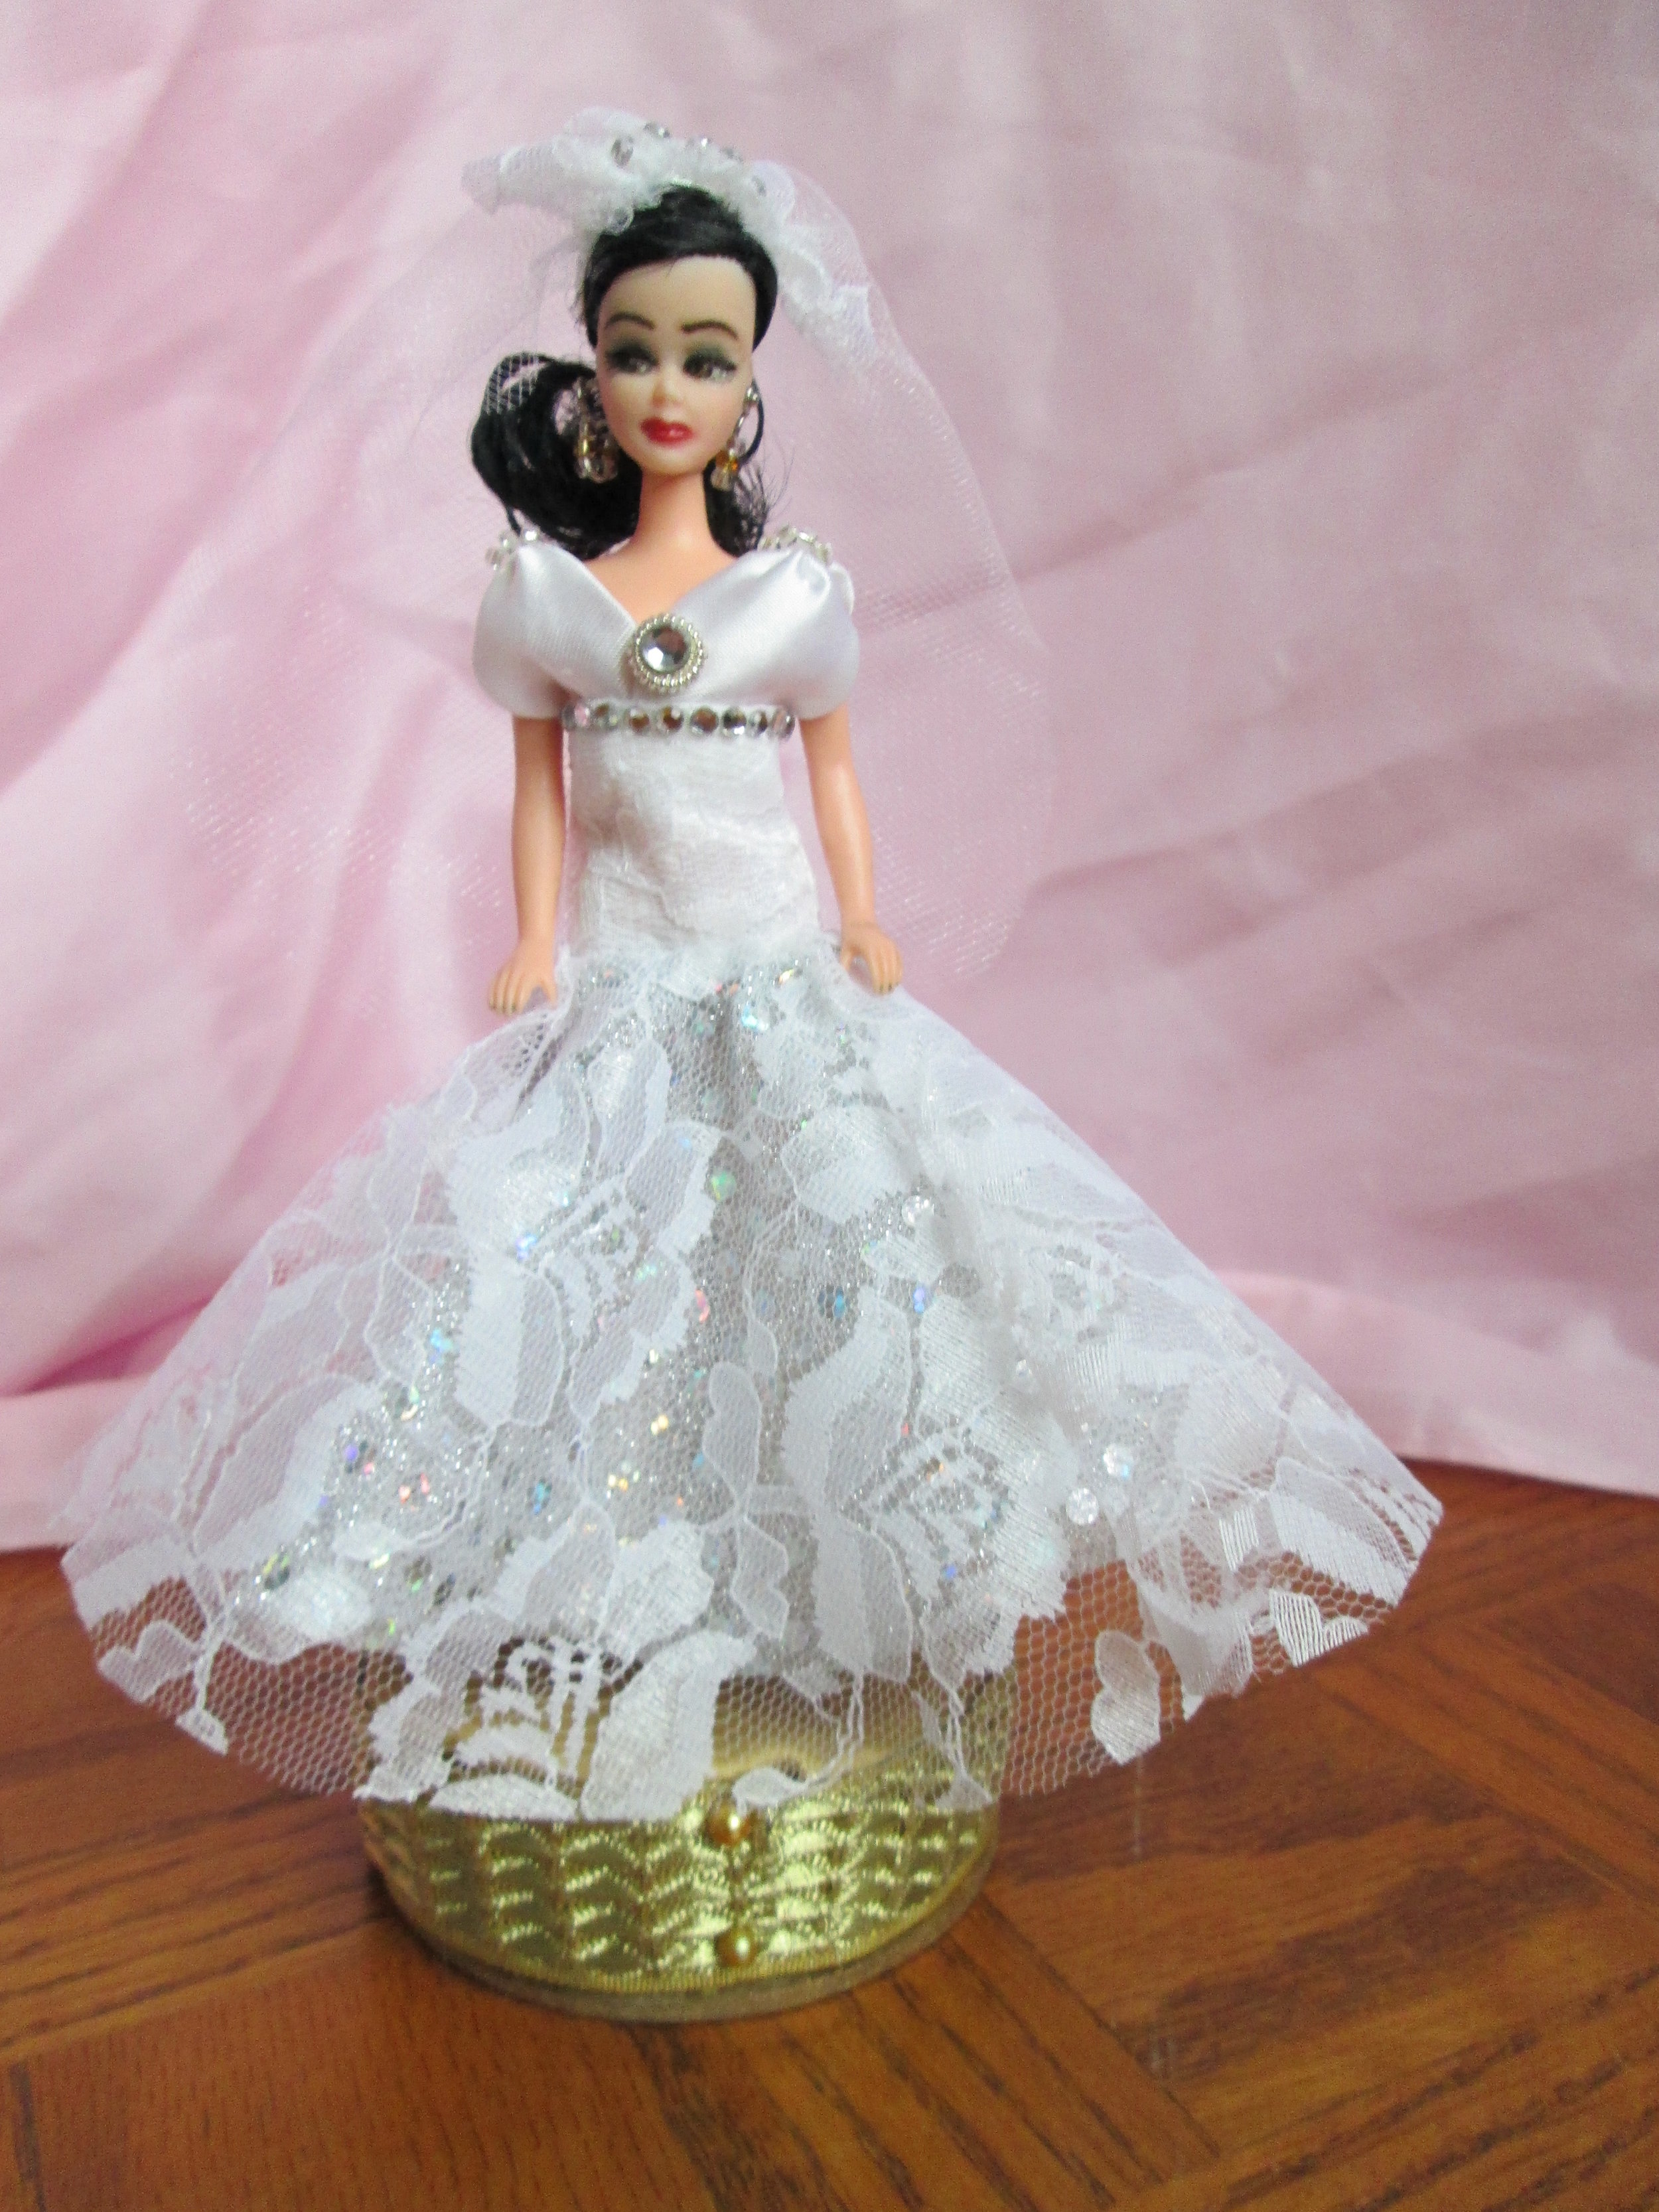 Handmade Dawn Doll Dresses and Accessories by JMB Designs